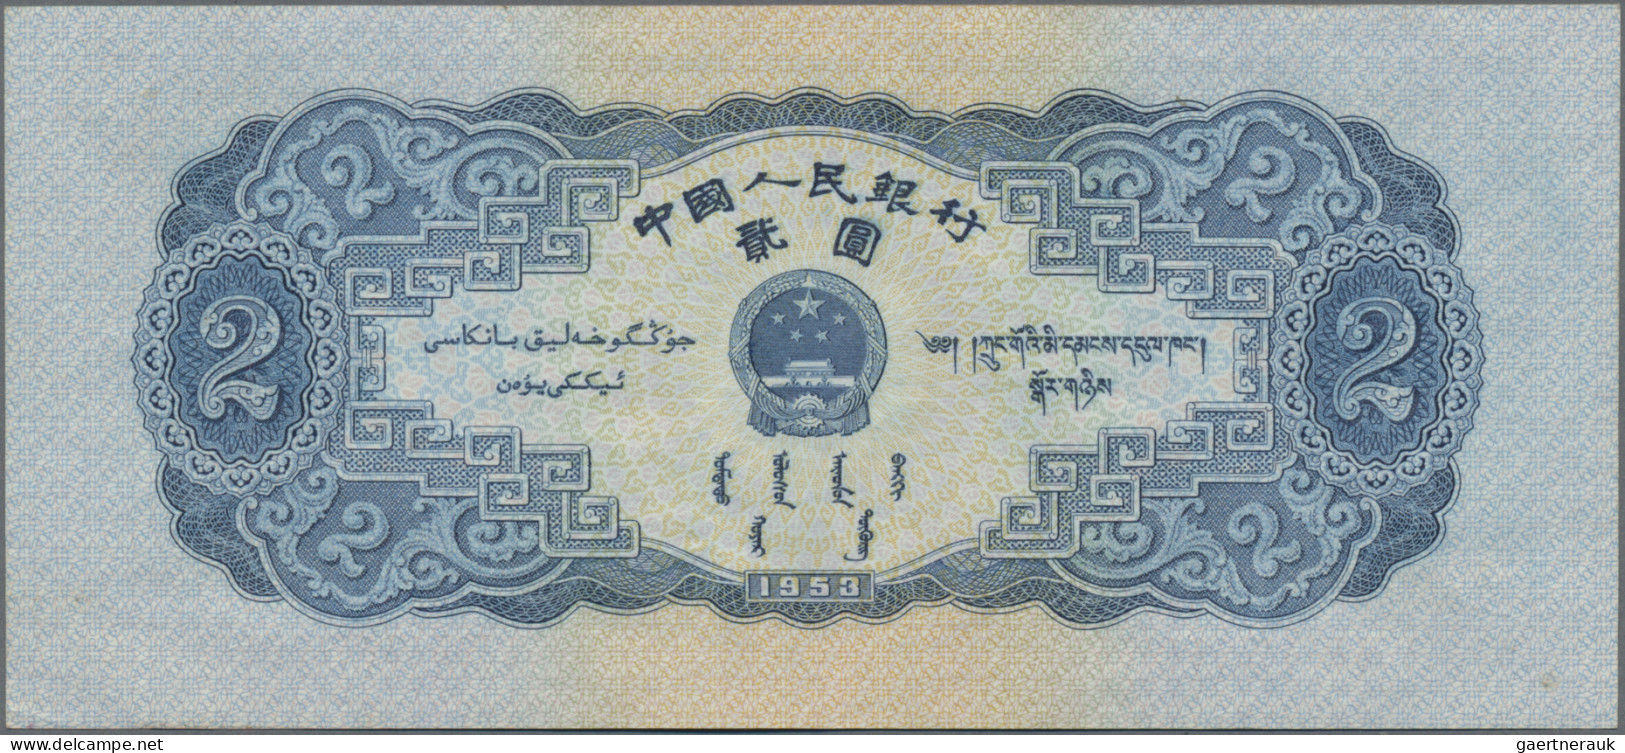 China: Peoples Republic of China 1953 second series set with 4 banknotes compris